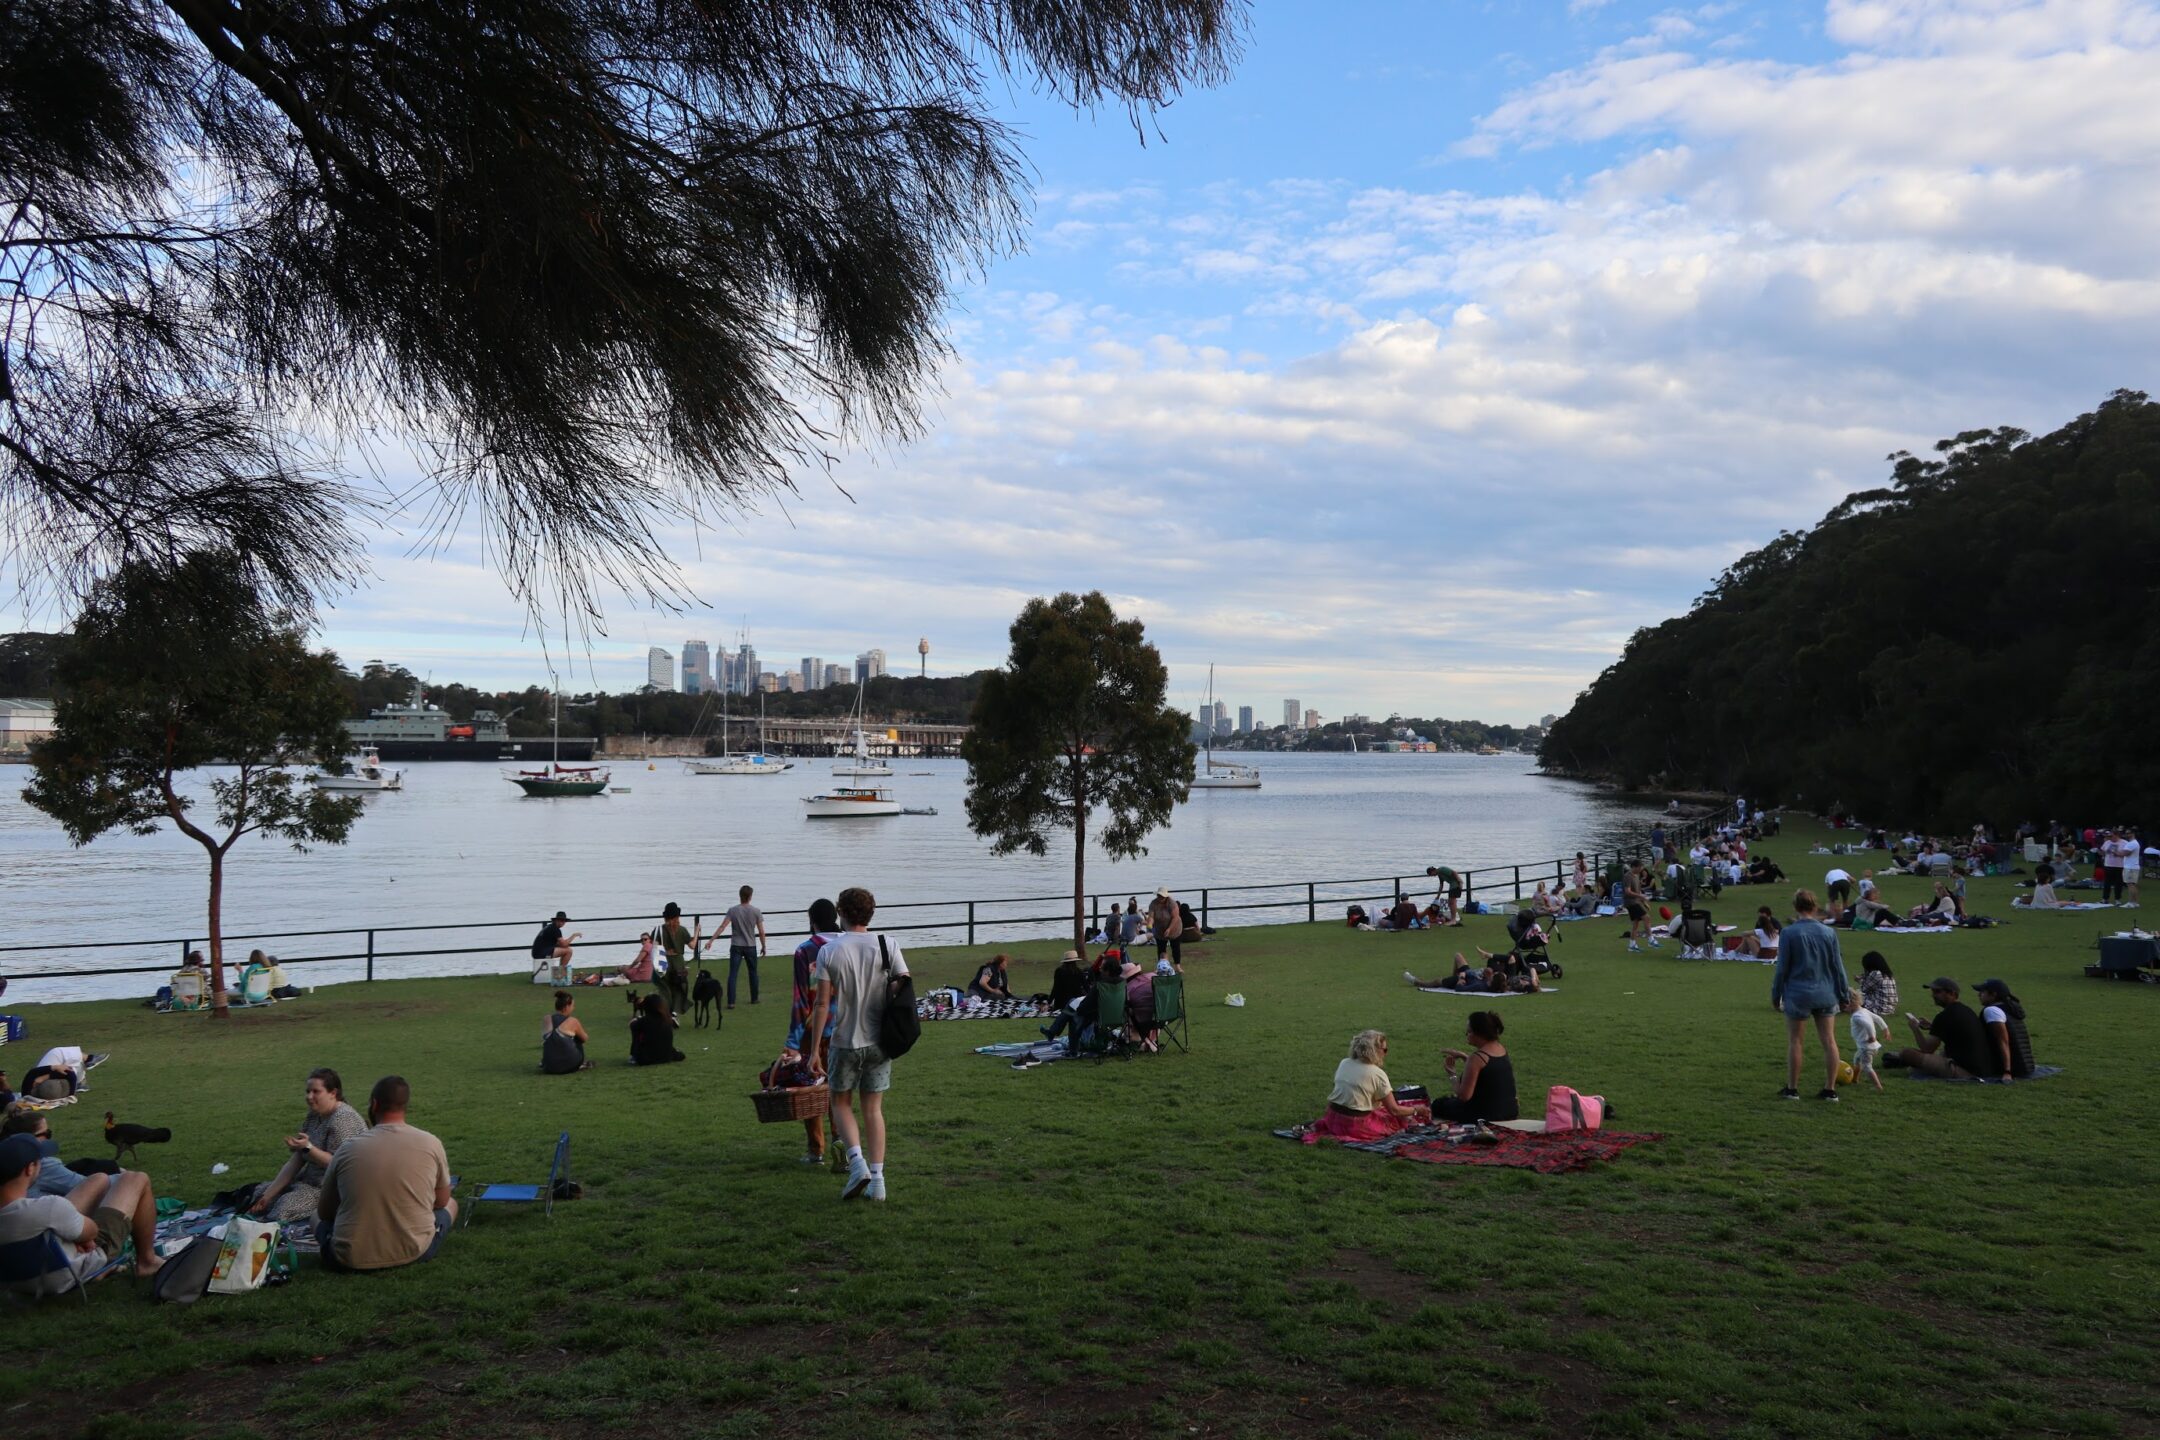 A view of a park with many people picnicing in front of a lake